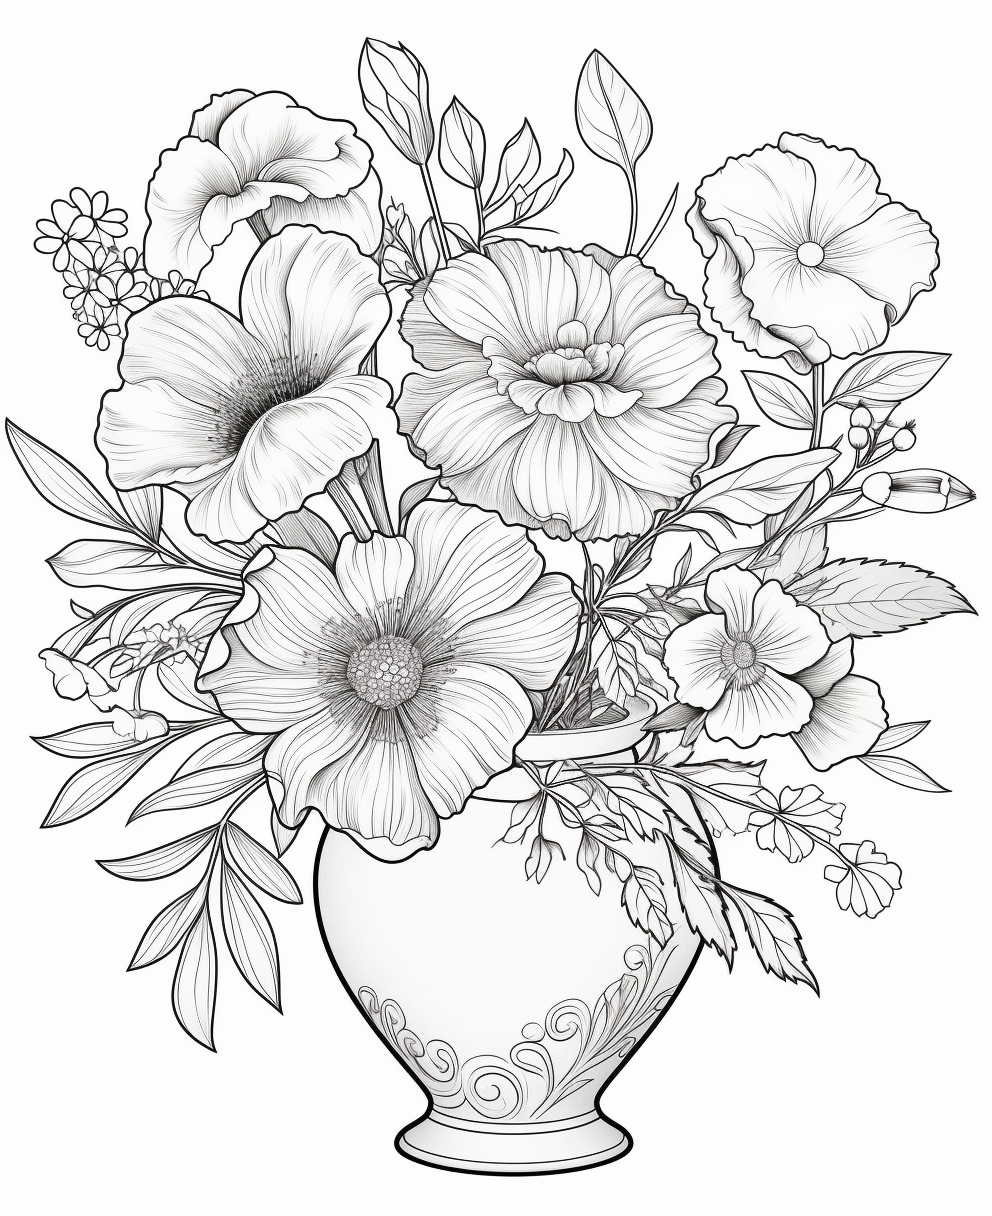 Flowers in a vase coloring books for children coloring pages